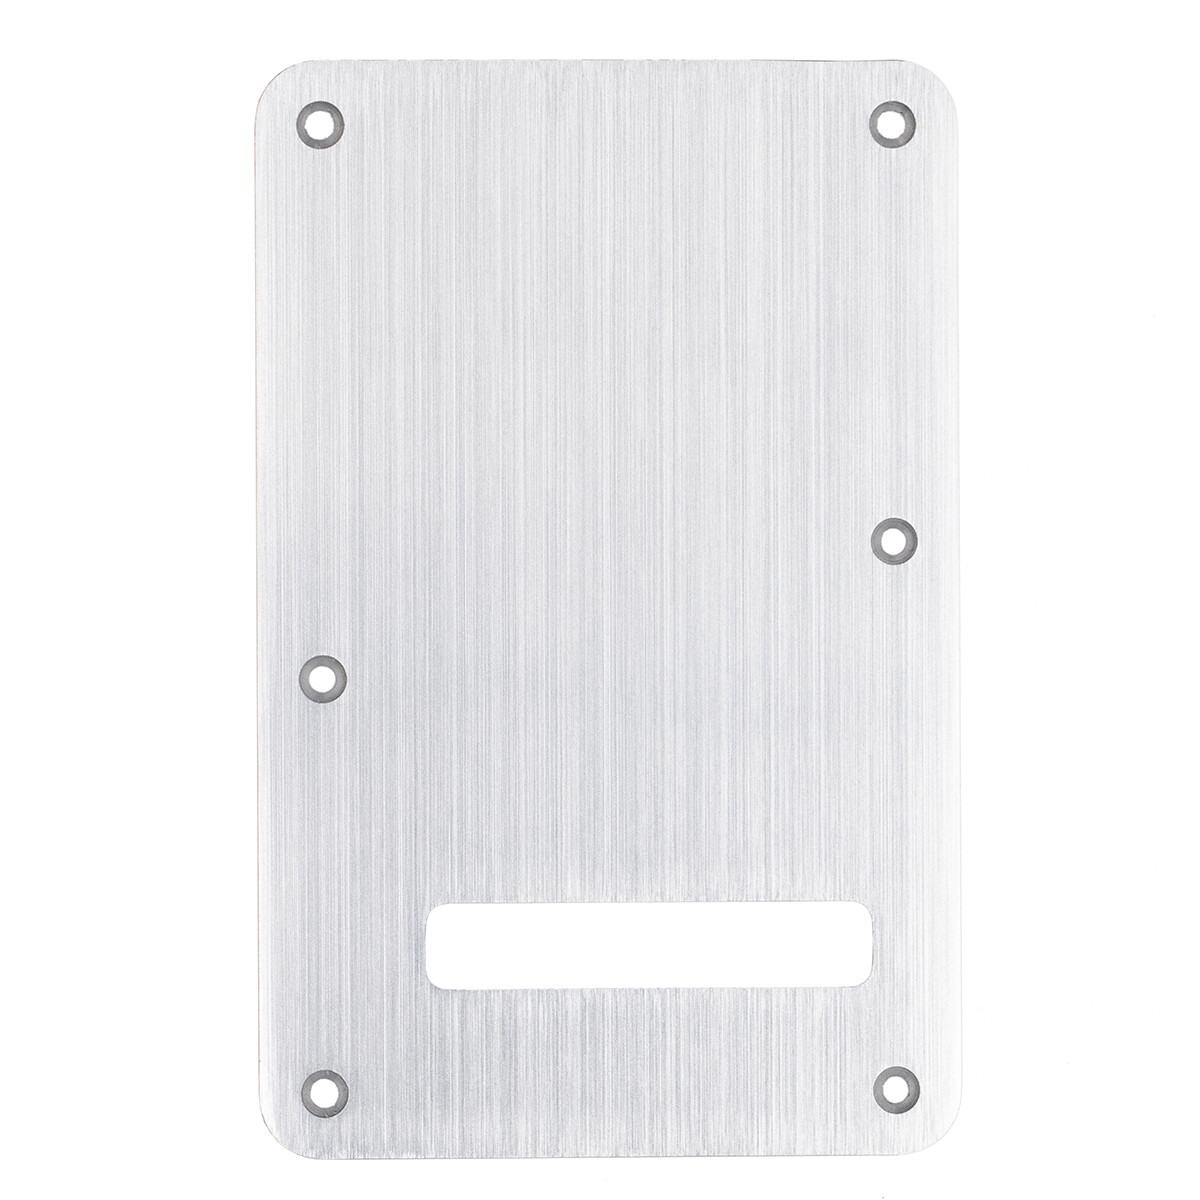 Brio Aluminum Modern Style Back Plate Tremolo Cover 1 ply - US/Mexican Fender®Strat® Fit